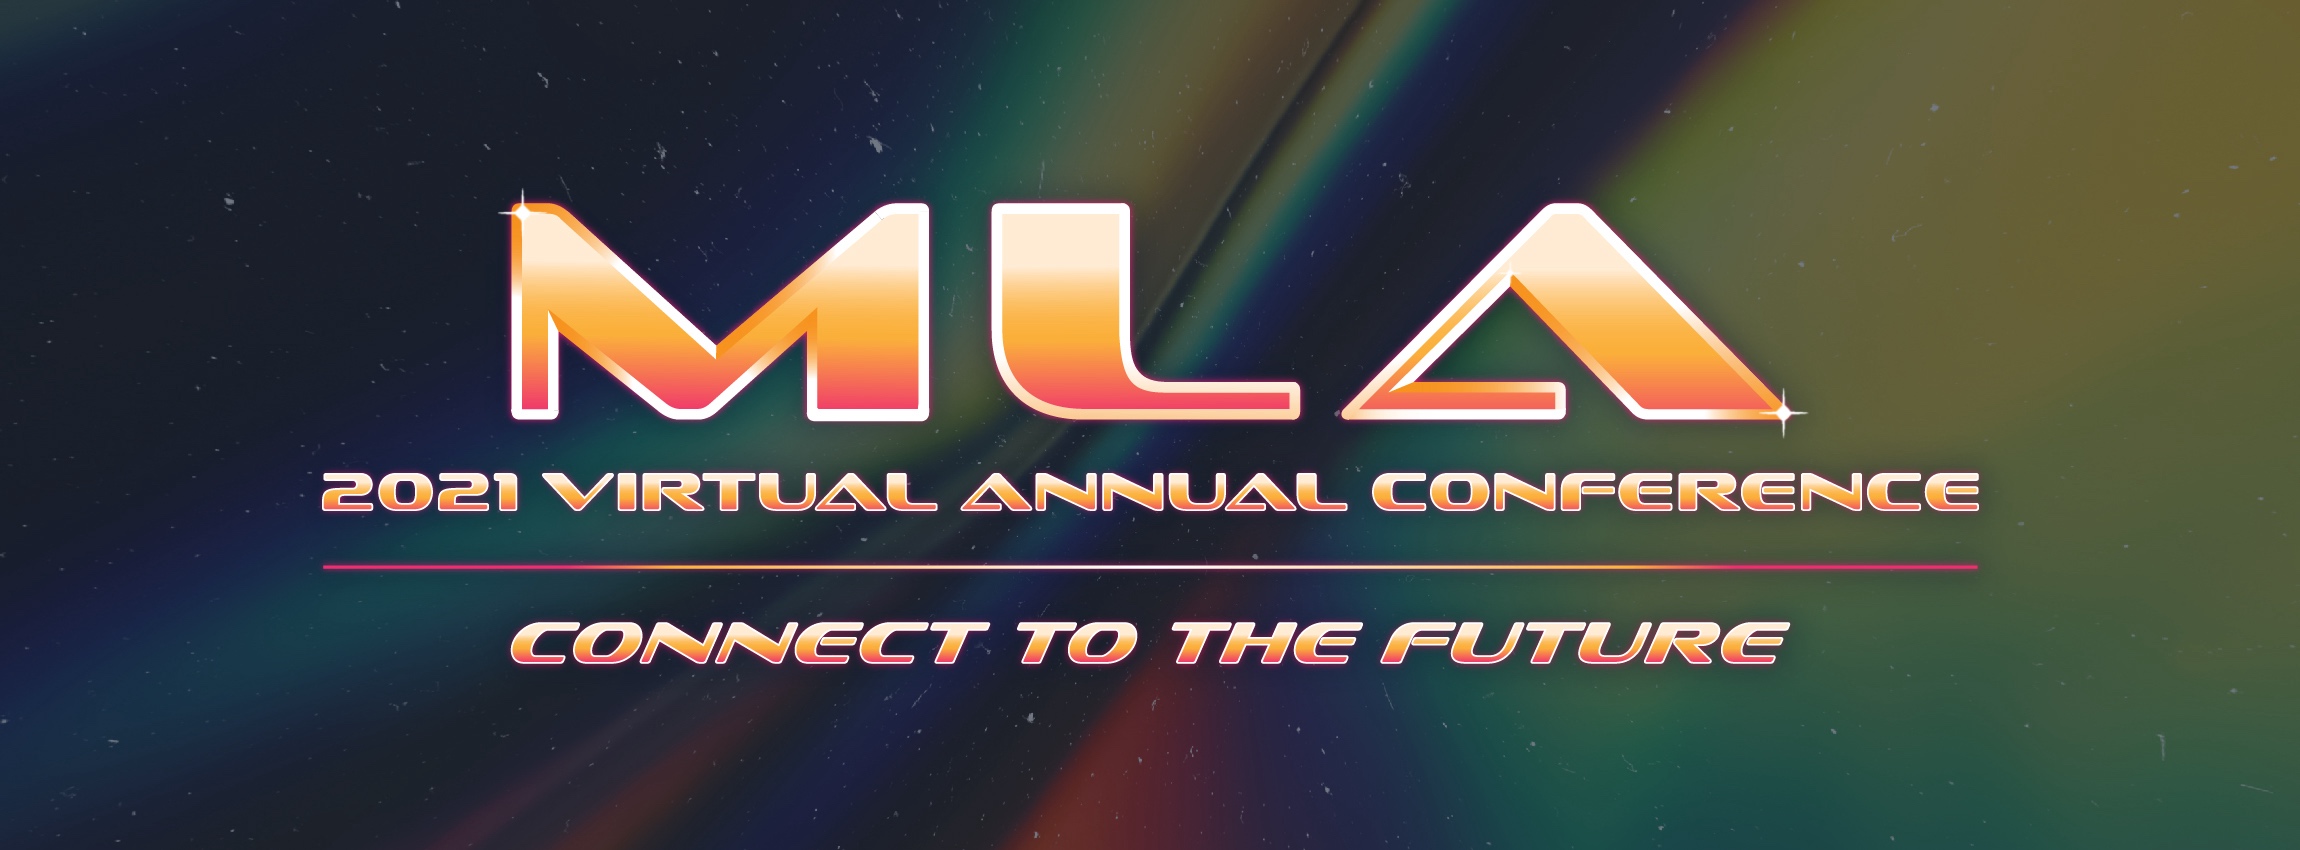  Text logo that says MLA 2021 Virtual Annual Conference Connect to the future